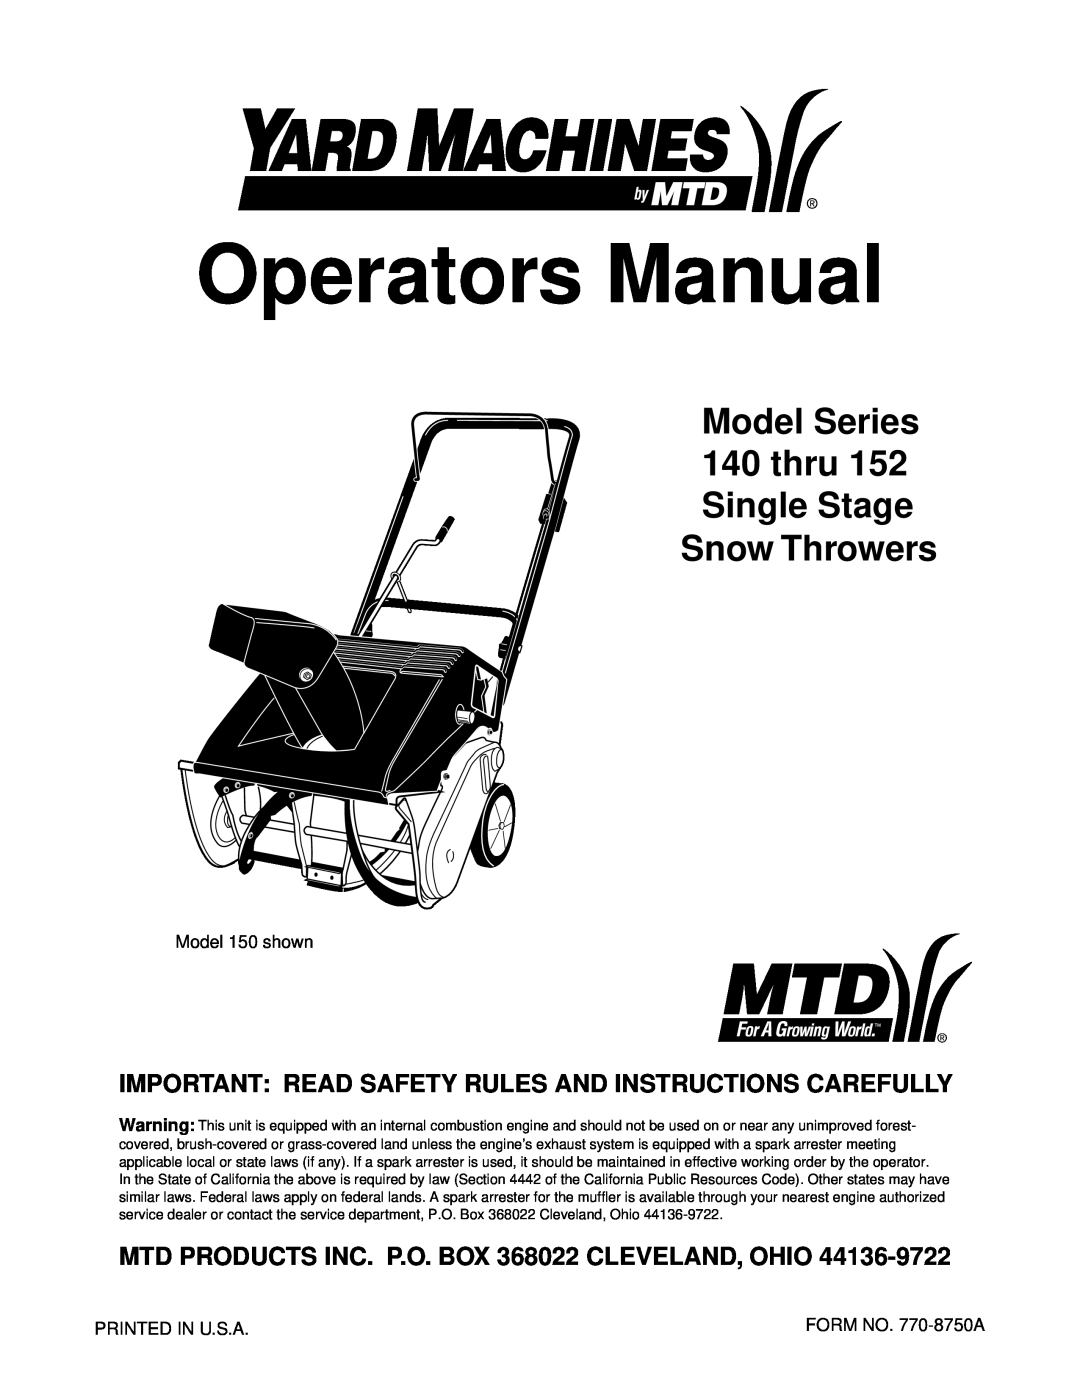 Yard Machines 140, 152 manual Important Read Safety Rules And Instructions Carefully, Operators Manual 